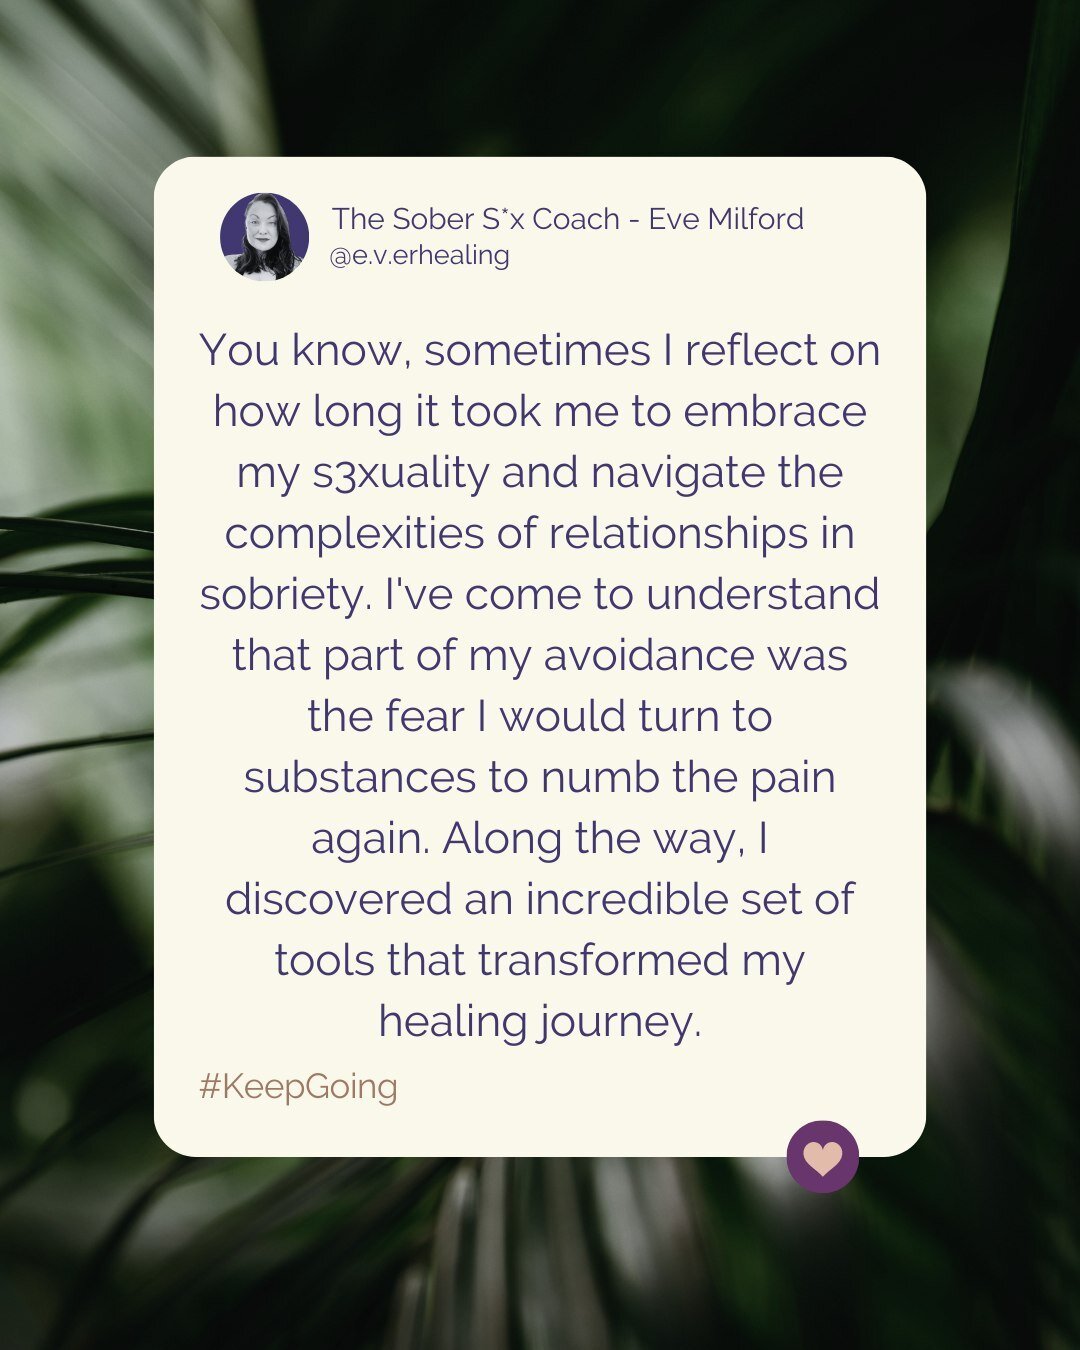 I realised that my avoidance stems from past toxic and abusive experiences, filled with violence and gaslighting. The pain caused by those relationships made me hesitant to delve into them again.

I've come to understand that part of my fear was the 